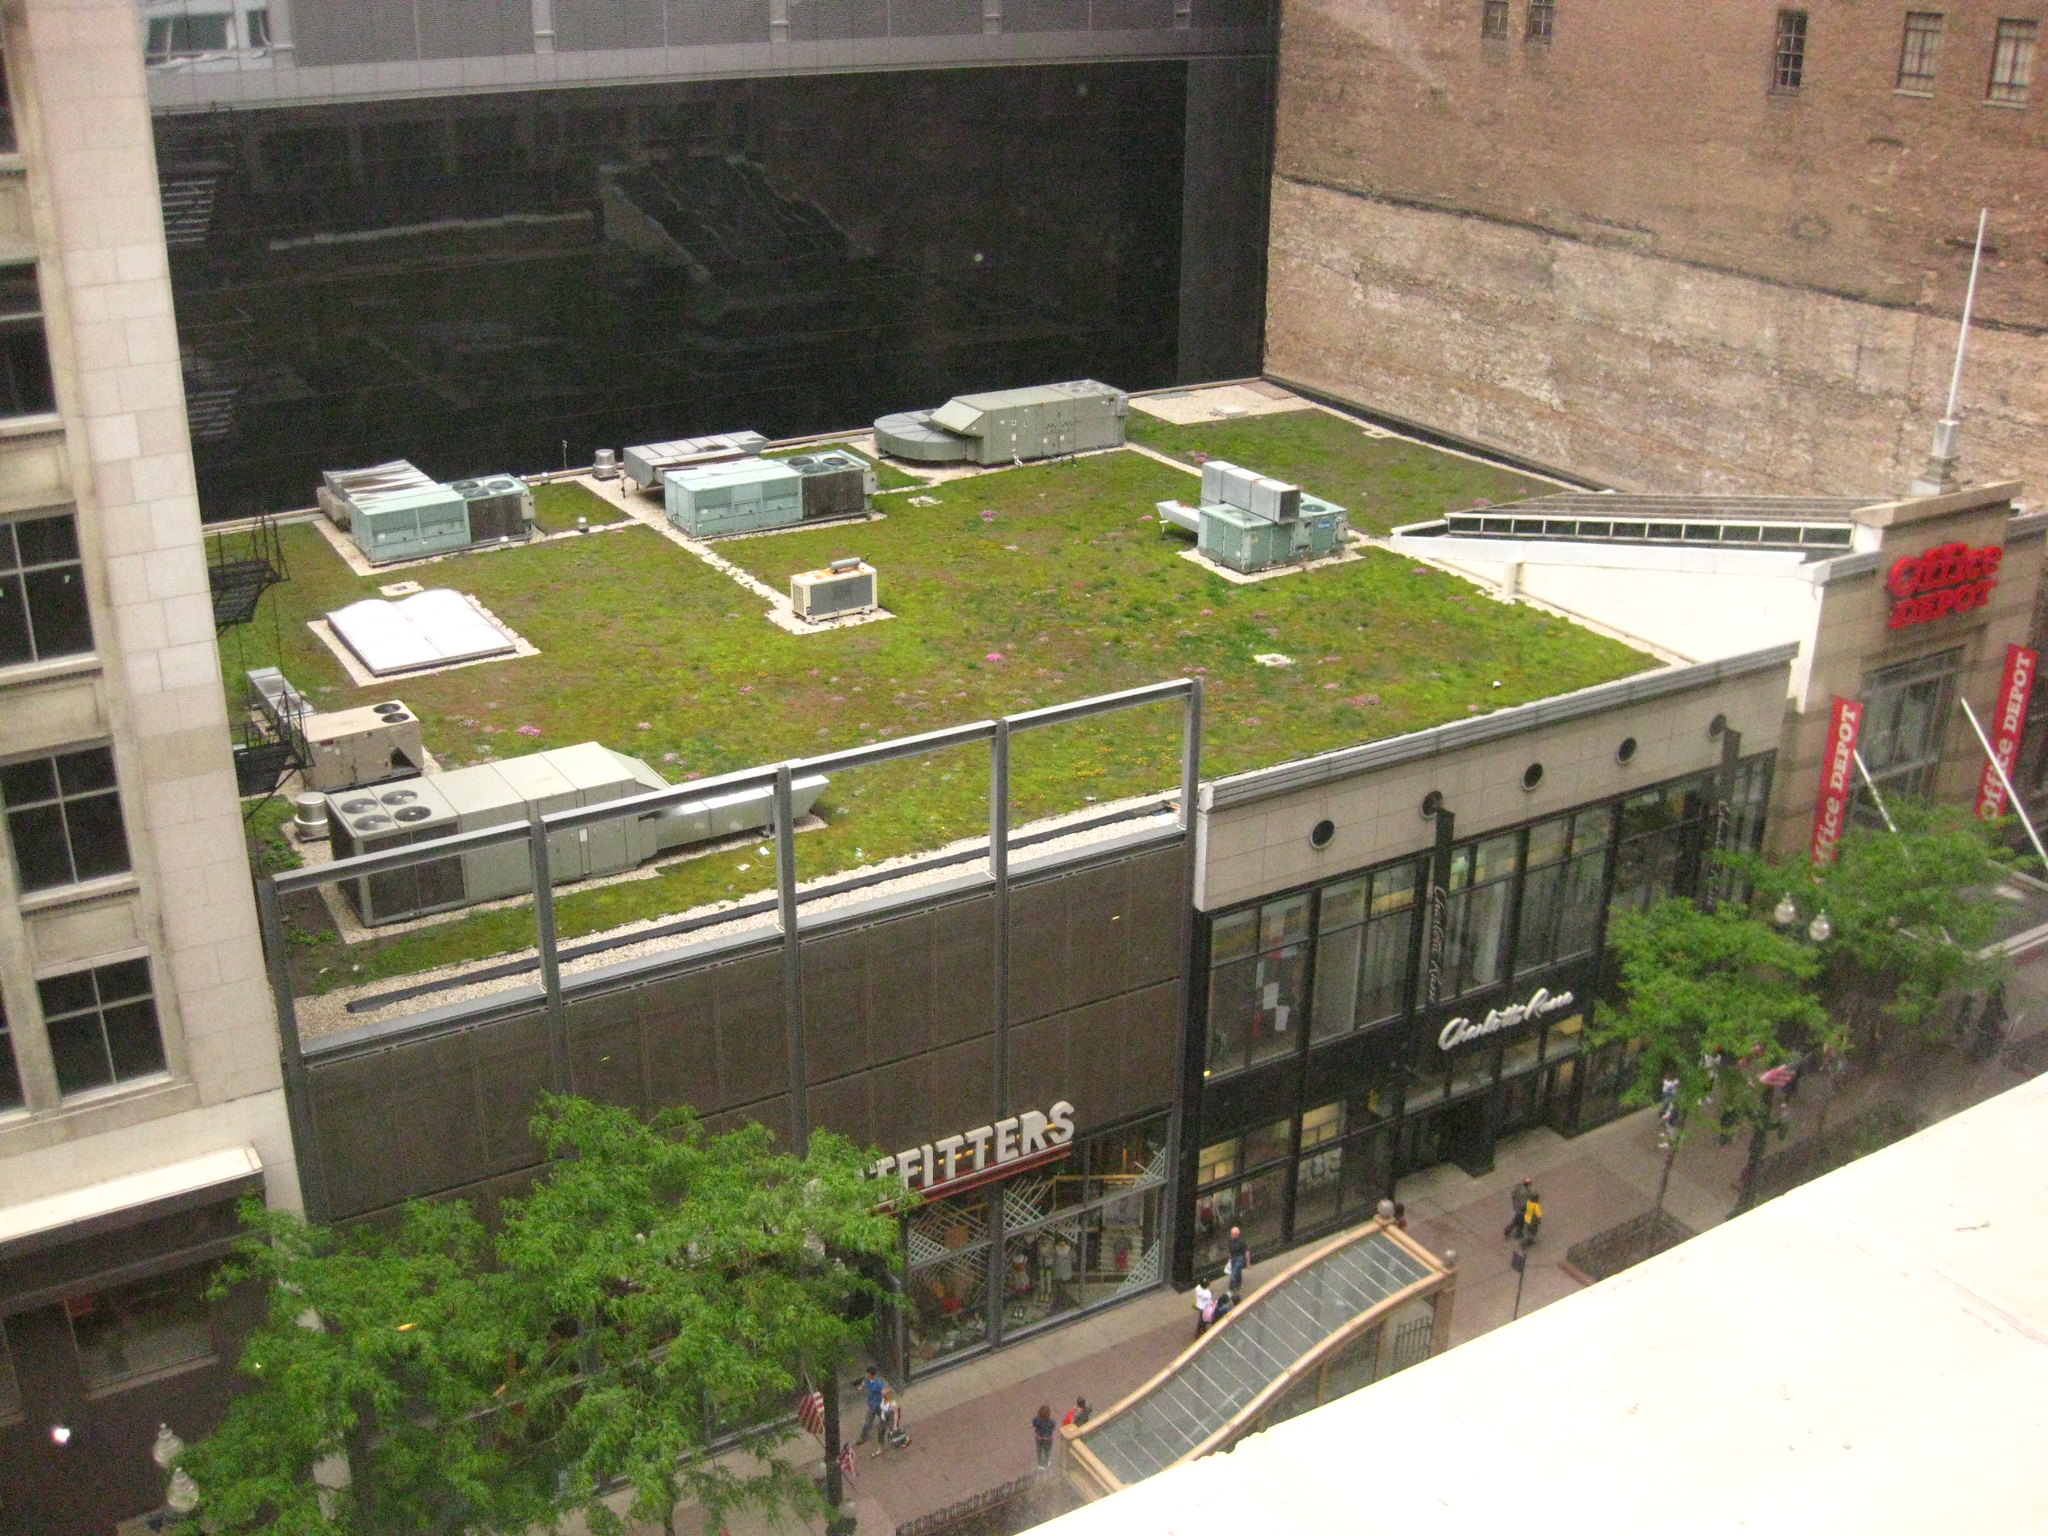 Photo of a building in Chicago with a green (plant-covered) roof